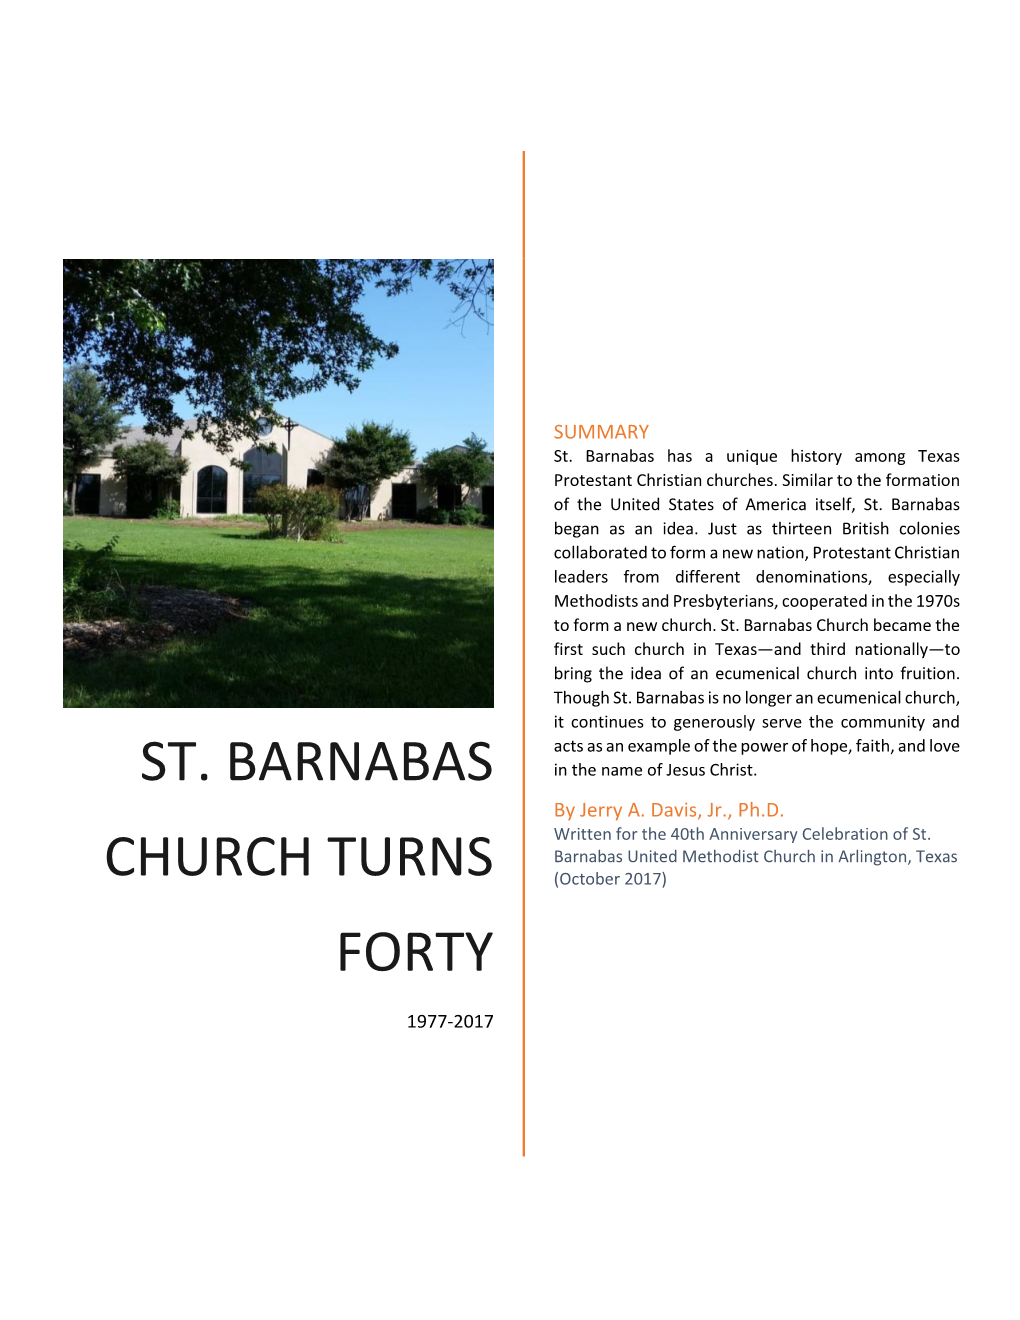 ST. Barnabas Church Turns Forty